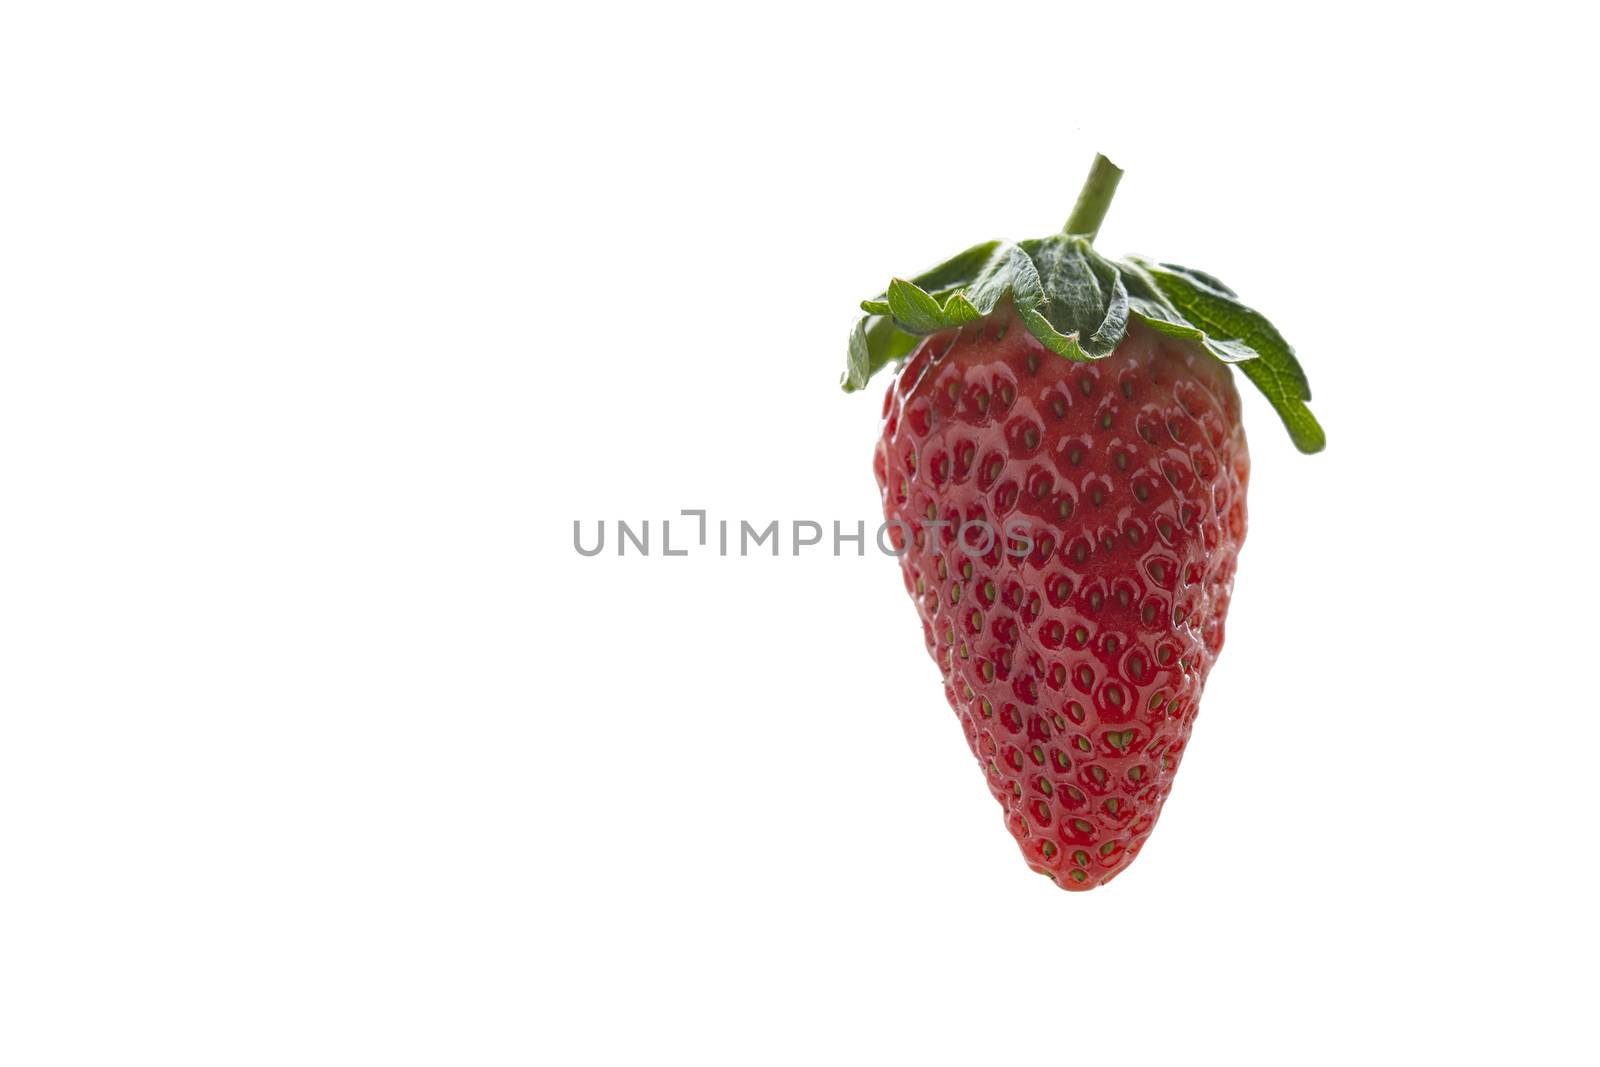 Strawberries against white background by ben44